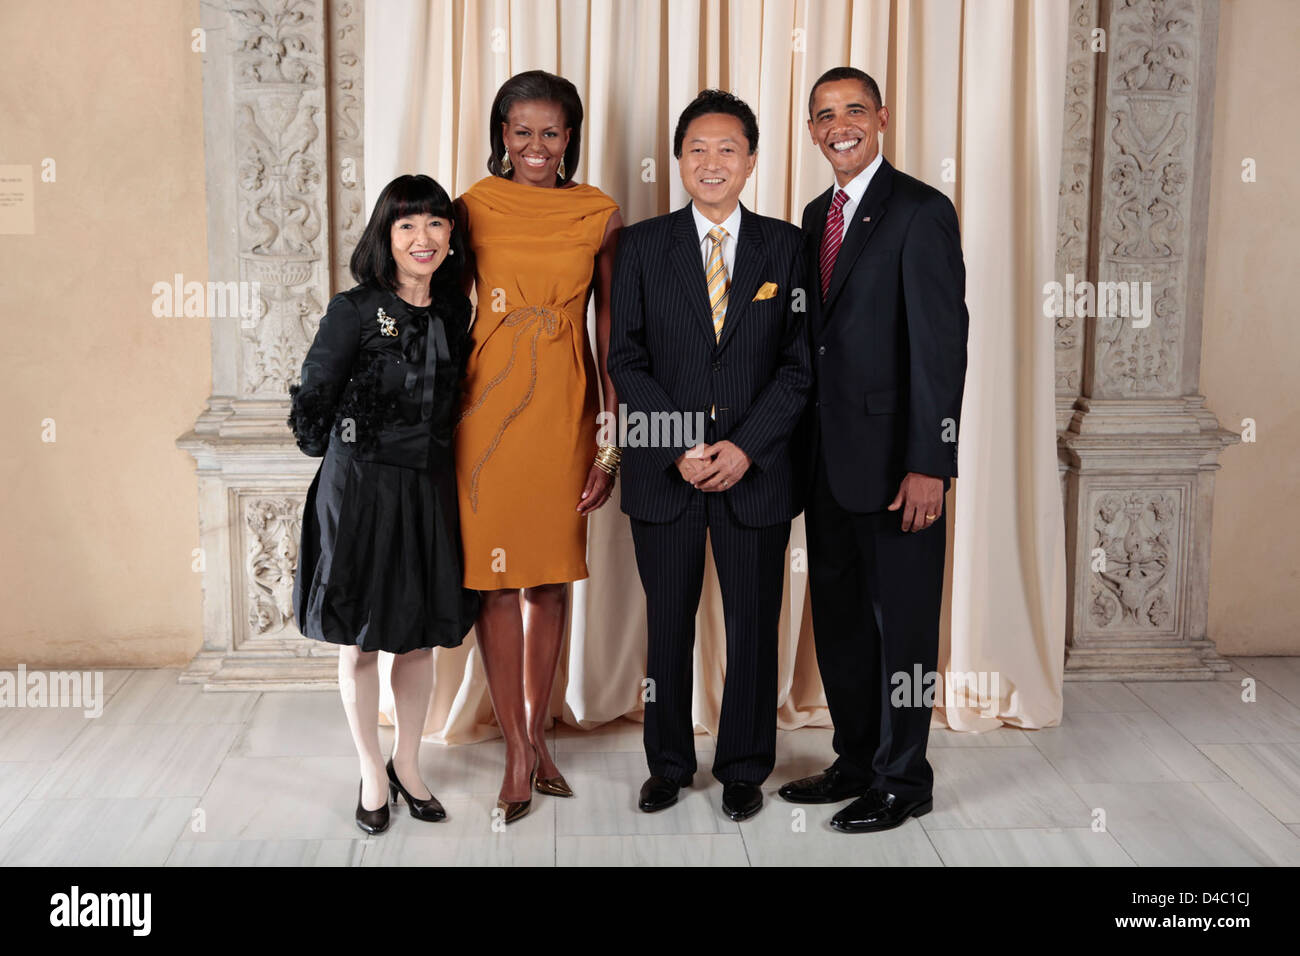 U.S. President Barack Obama and First Lady Michelle Obama With World Leaders at the Metropolitan Museum in New York Stock Photo